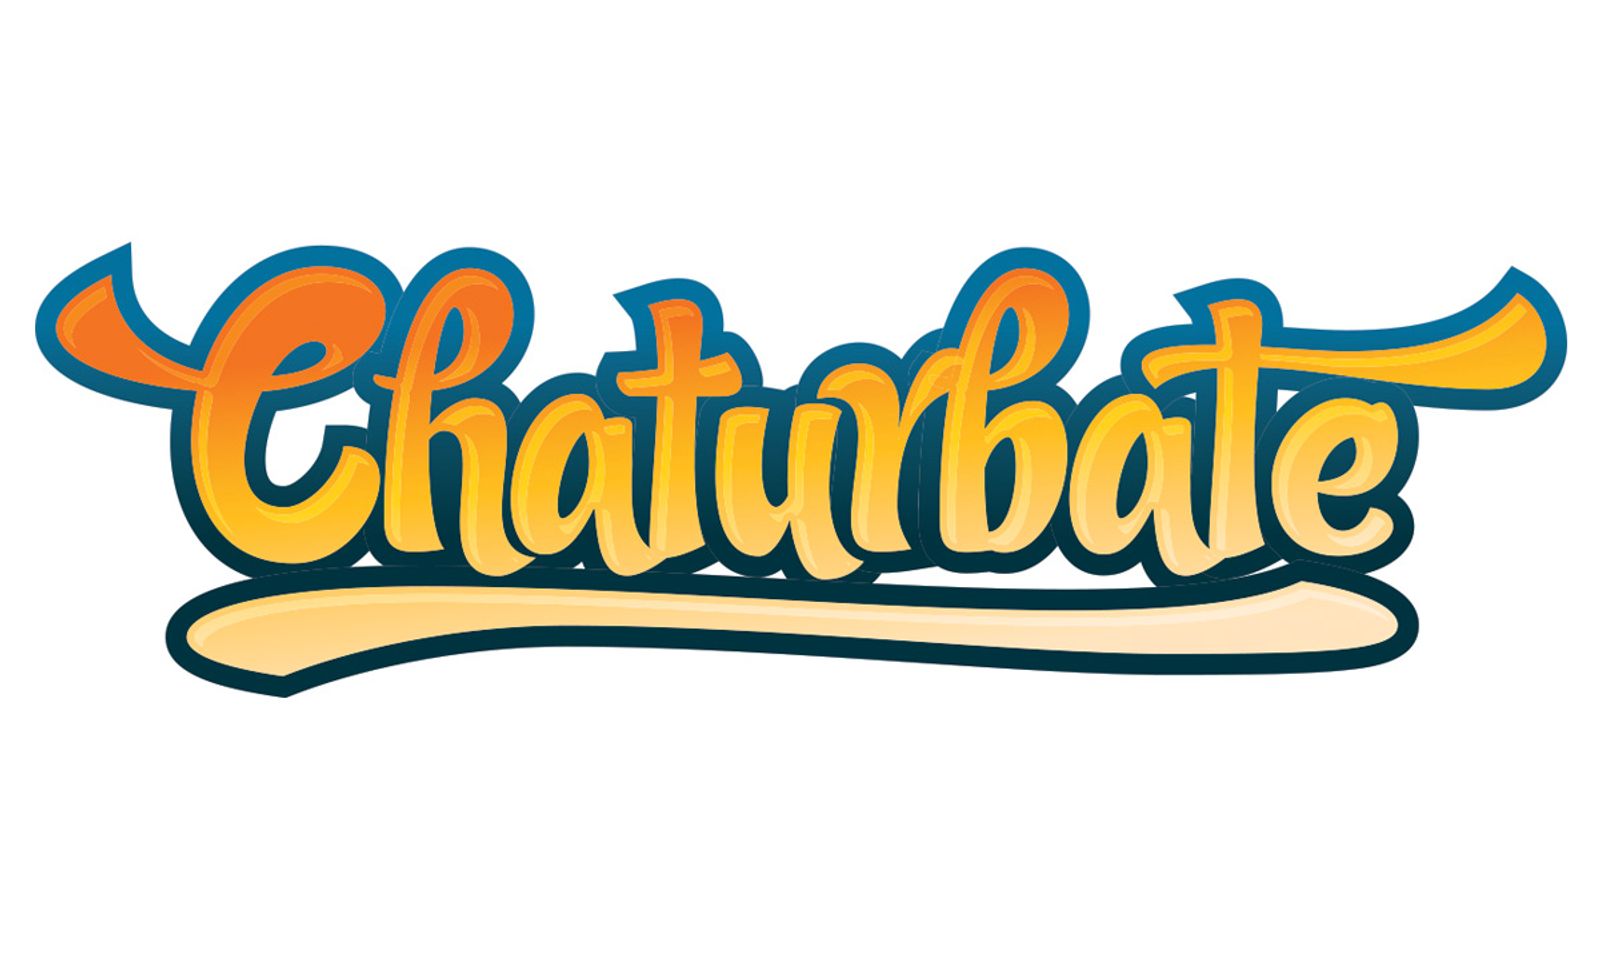 Misty Anderson to Make Guest Appearance on Chaturbate Tonight